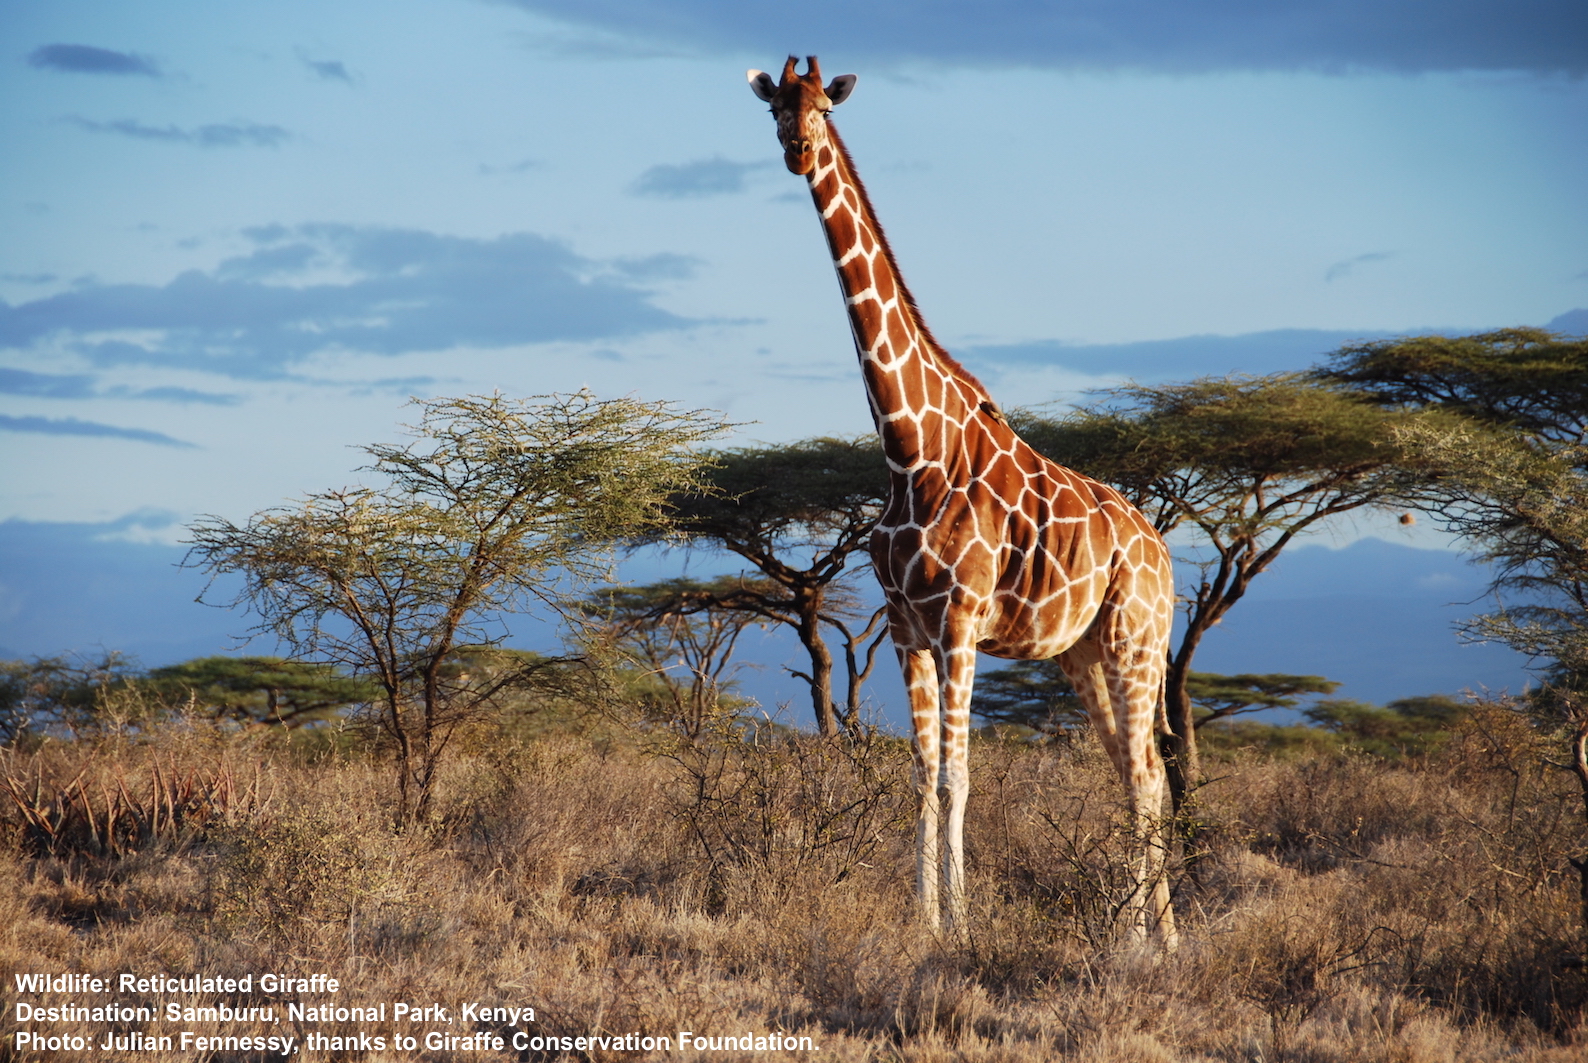 how much sleep do giraffes need and how do they have the shortest sleep requirements of any mammal